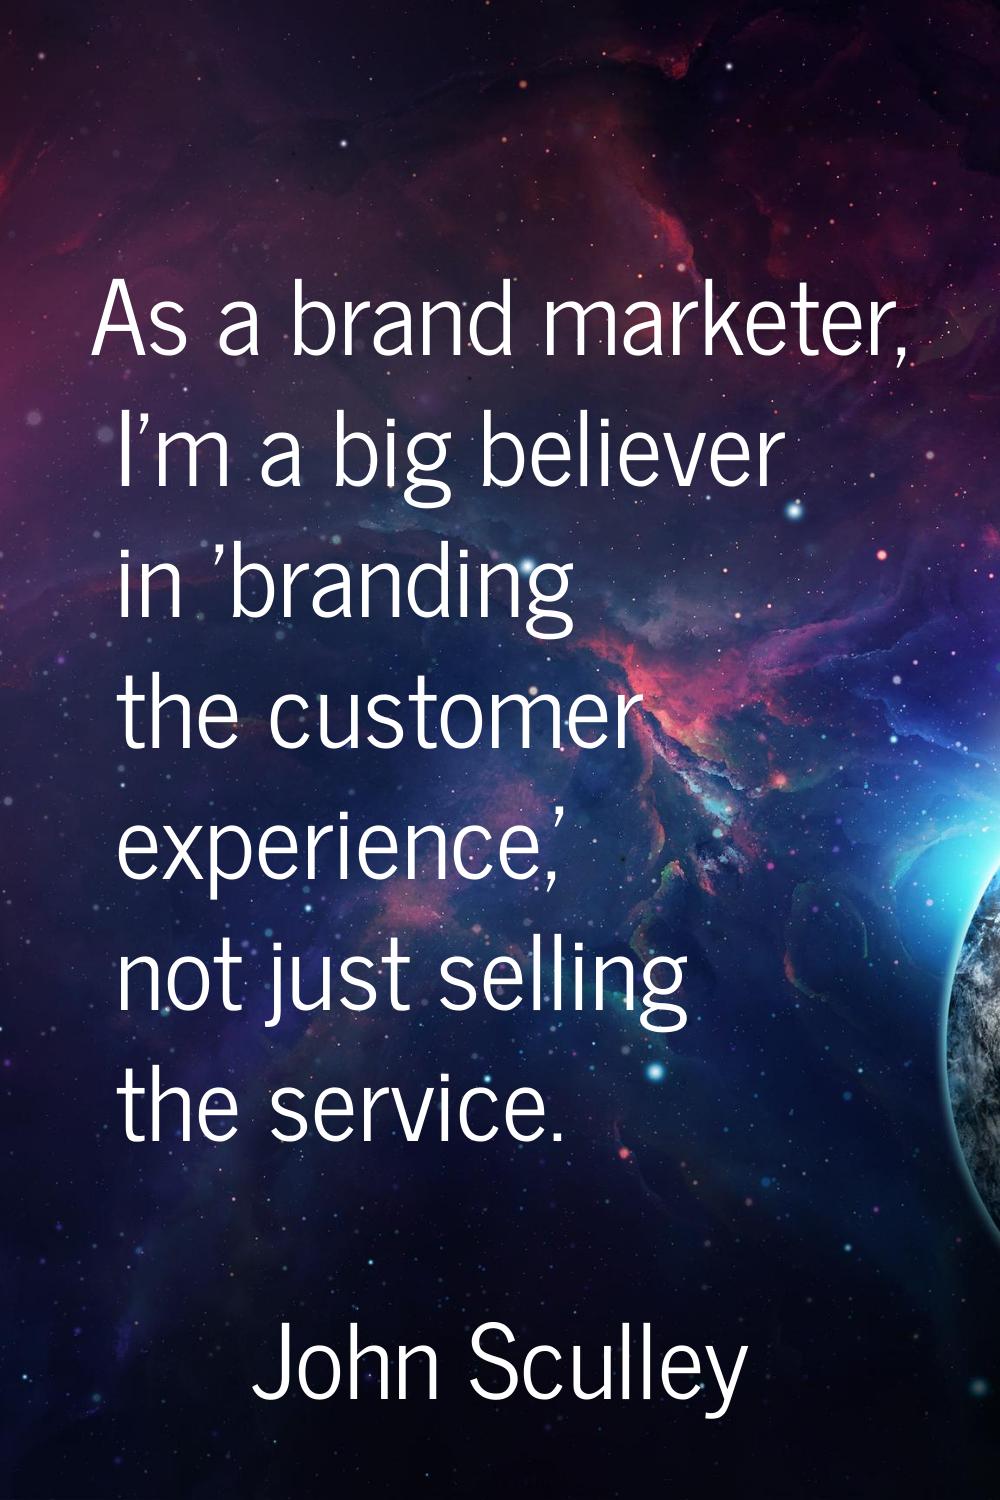 As a brand marketer, I'm a big believer in 'branding the customer experience,' not just selling the